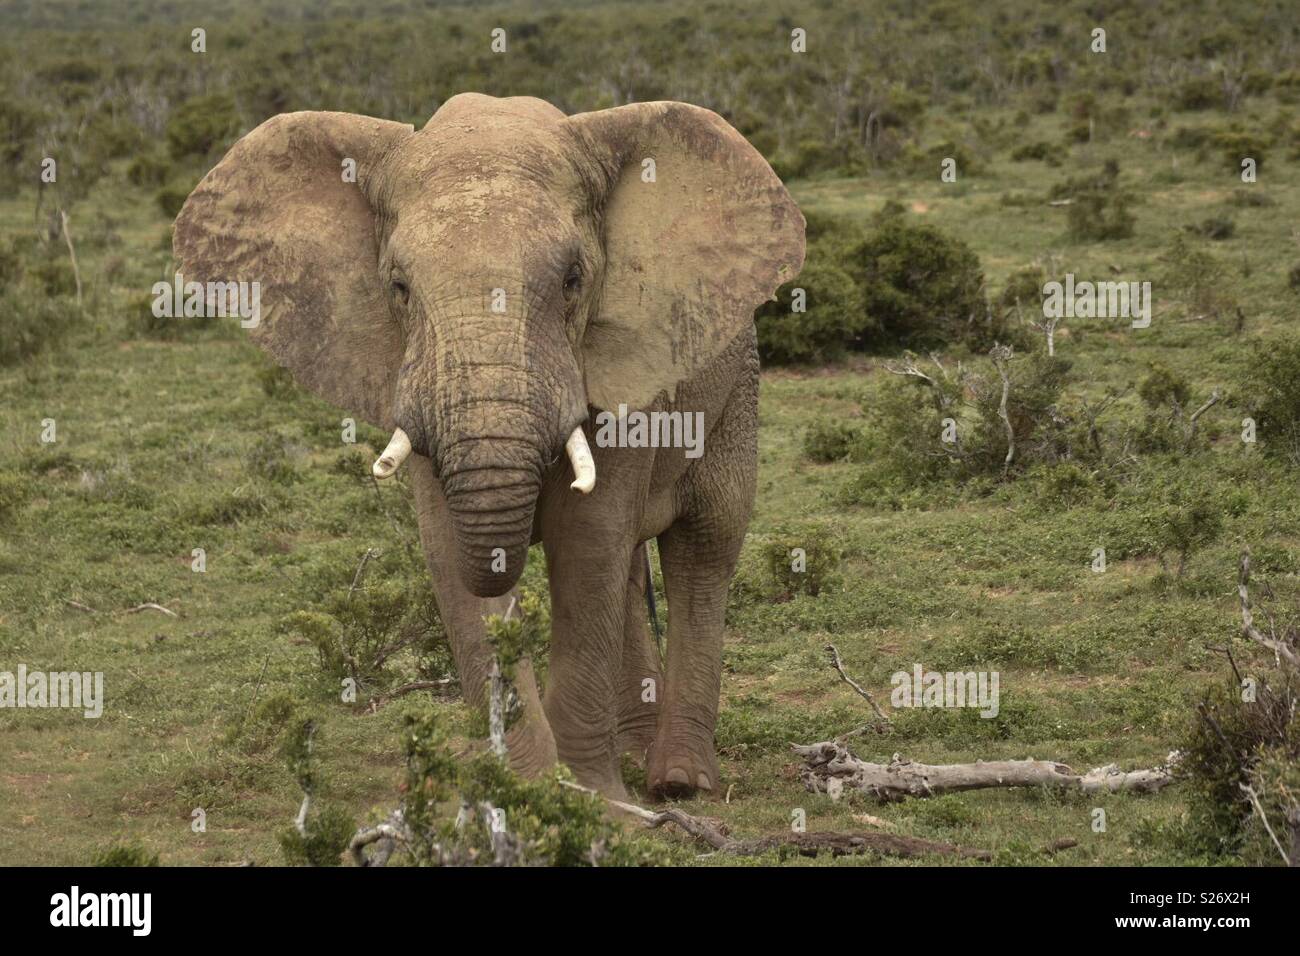 Elephant from South Africa Stock Photo